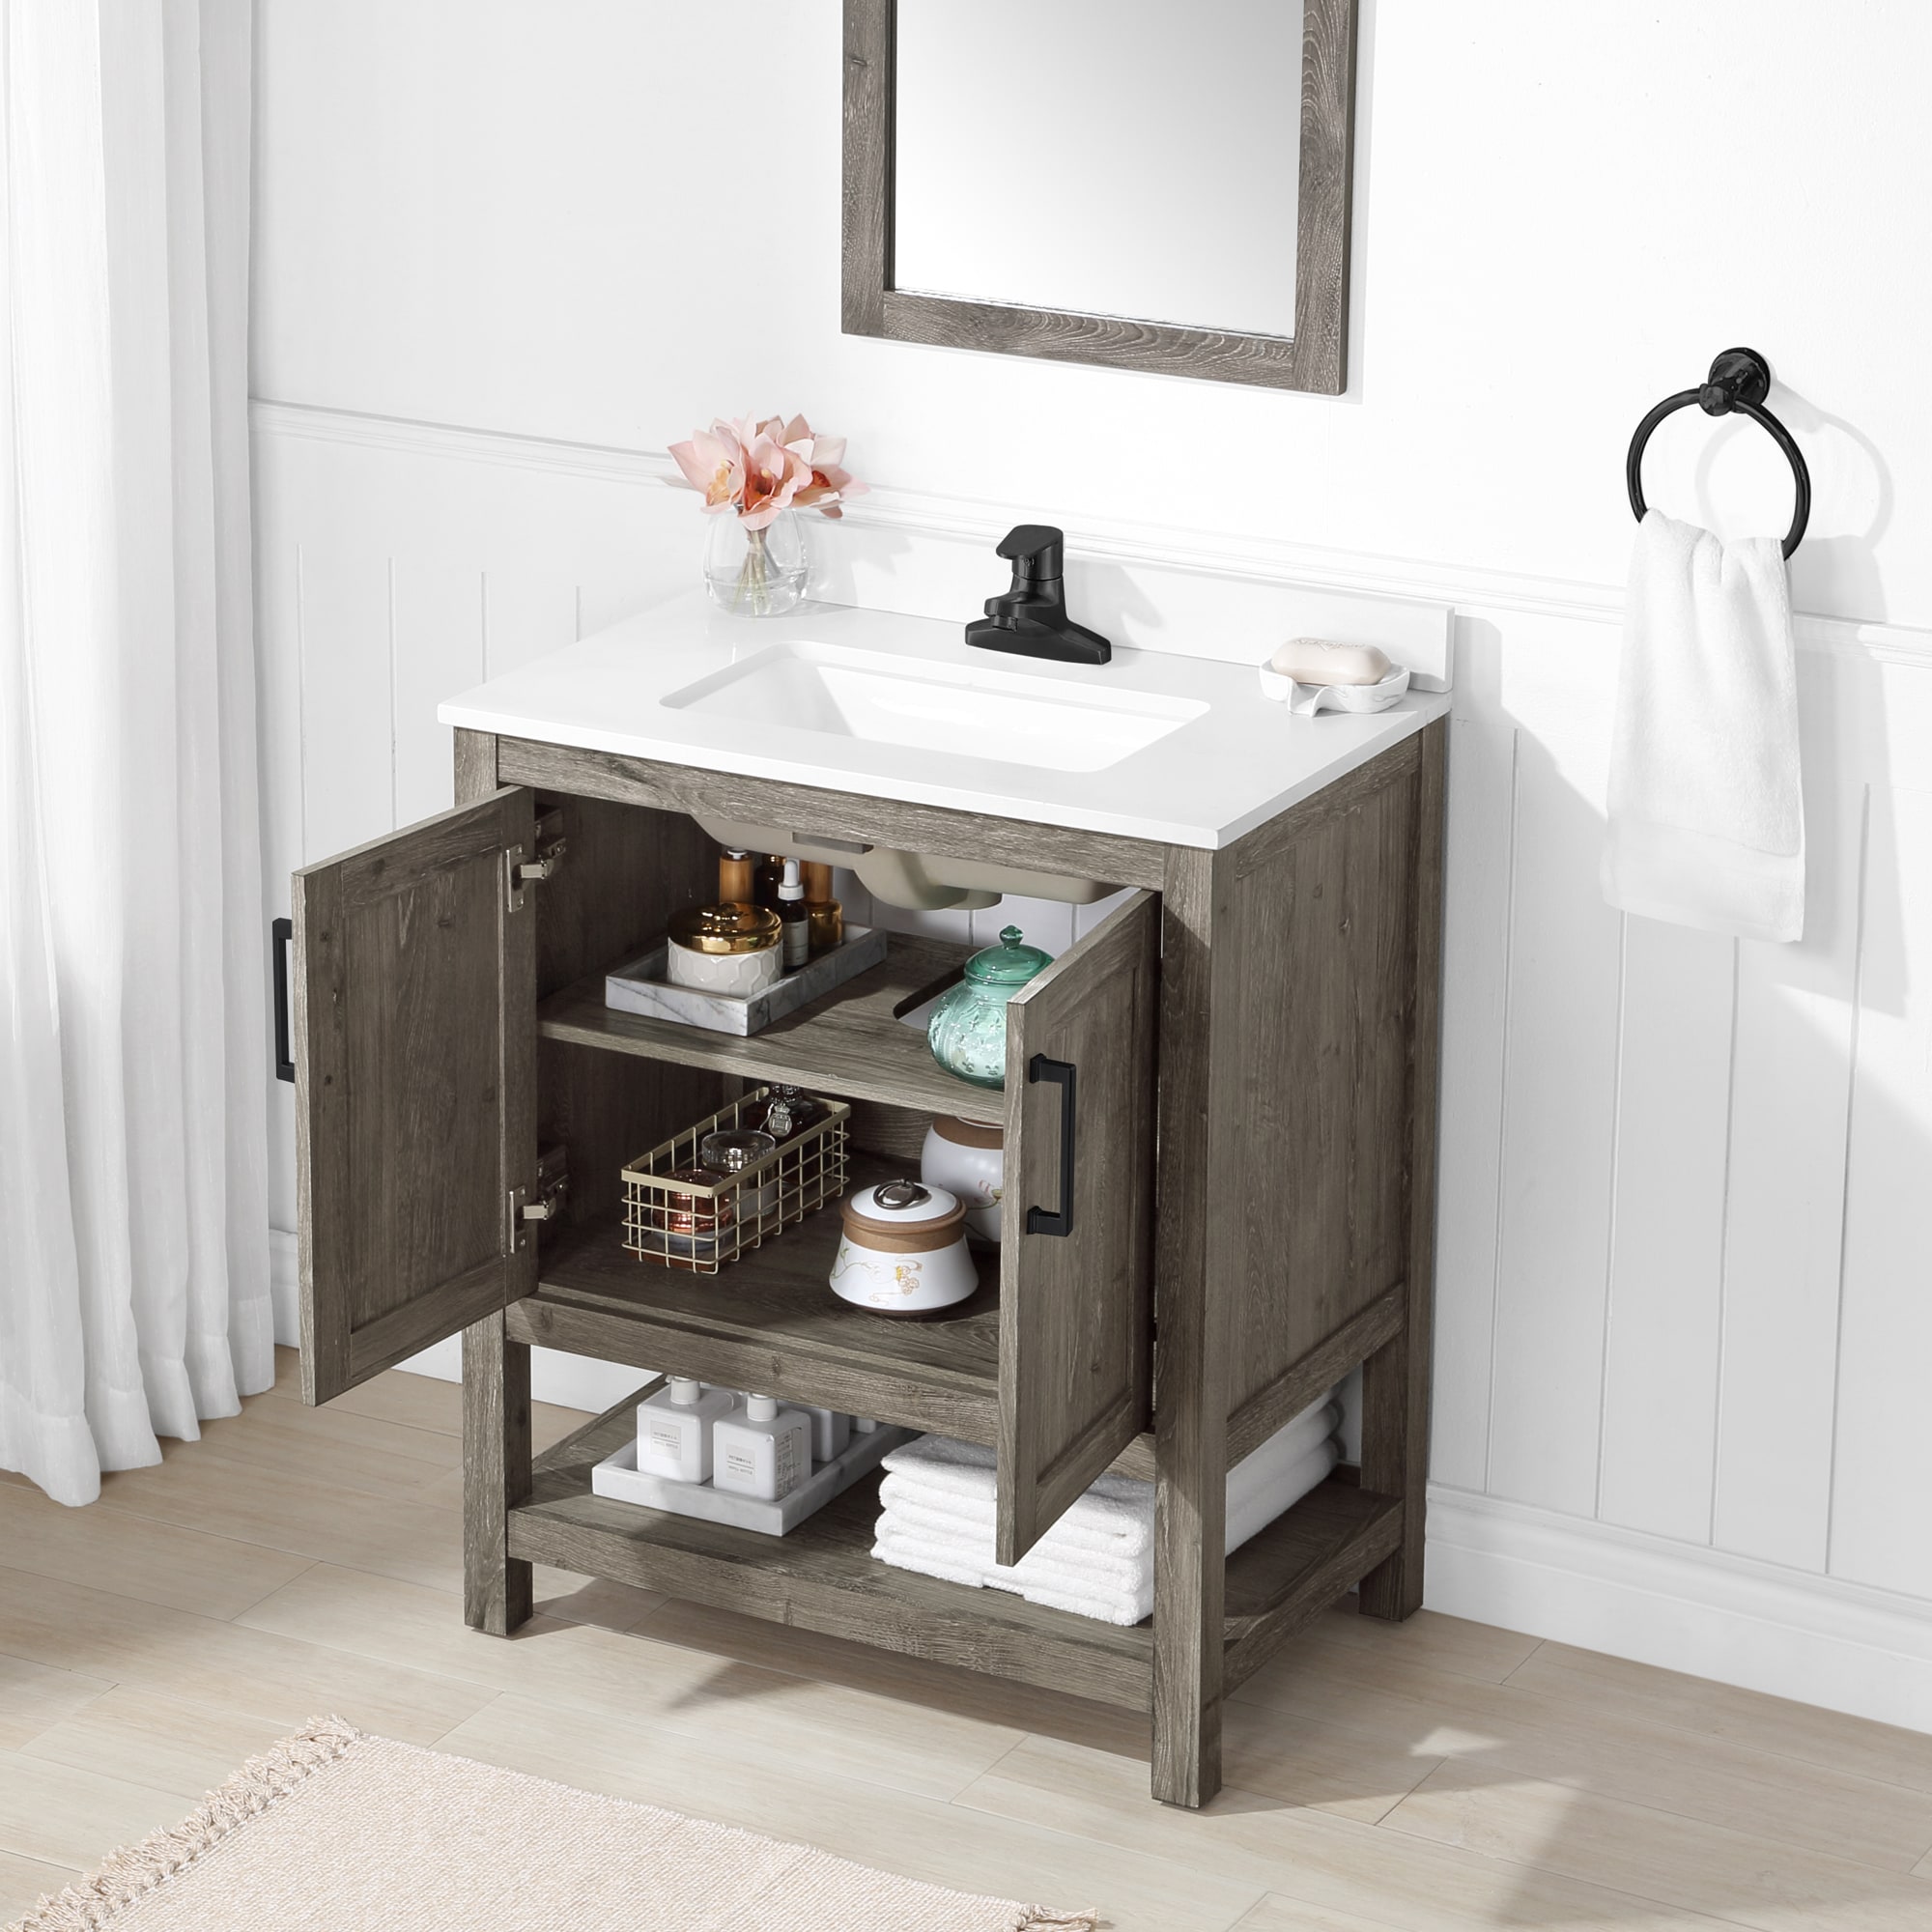 Comfystyle Solid-Wood 36 in. W x 22 in. H x 38 in. D Bath Vanity in Gray  with White Stone Top, Cabinet and Single Sink HO11SBV3600FSGXMSX - The Home  Depot